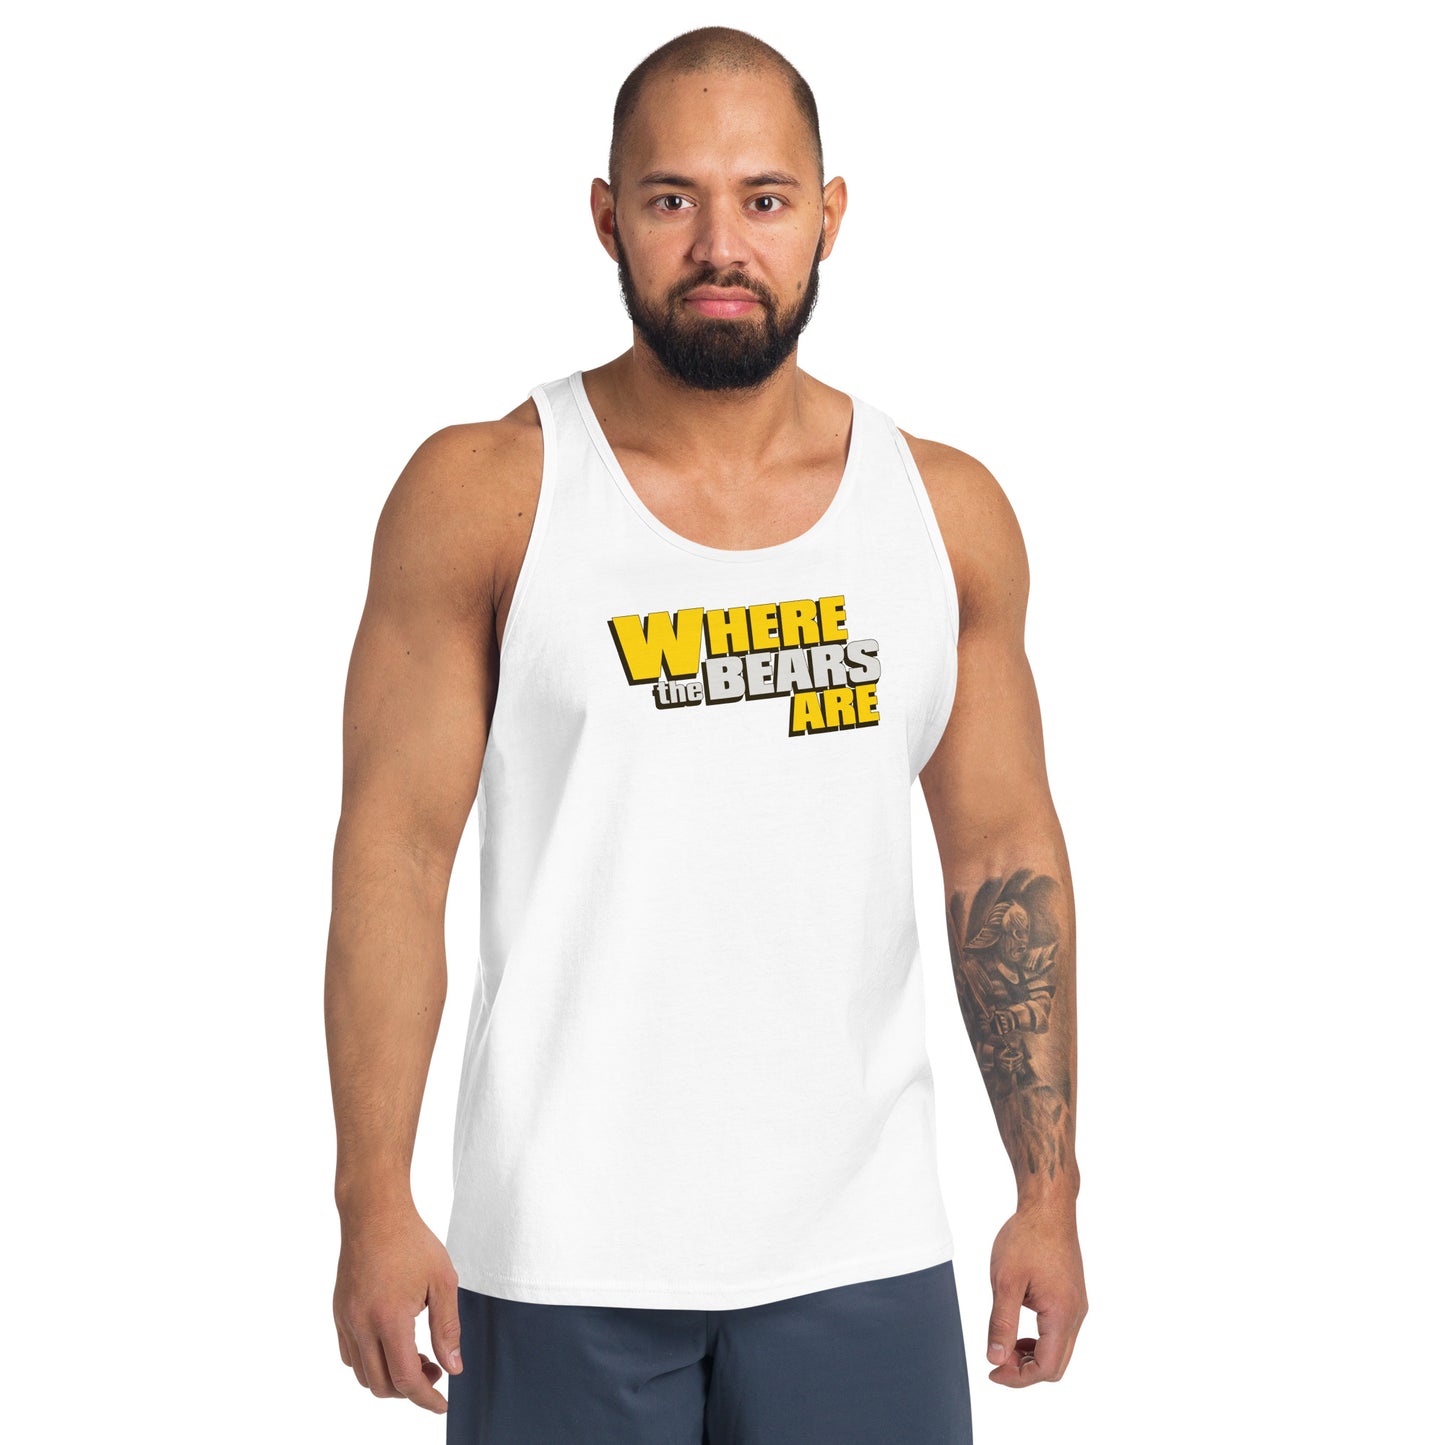 'Where The Bears Are' Large Logo Unisex Tank Top